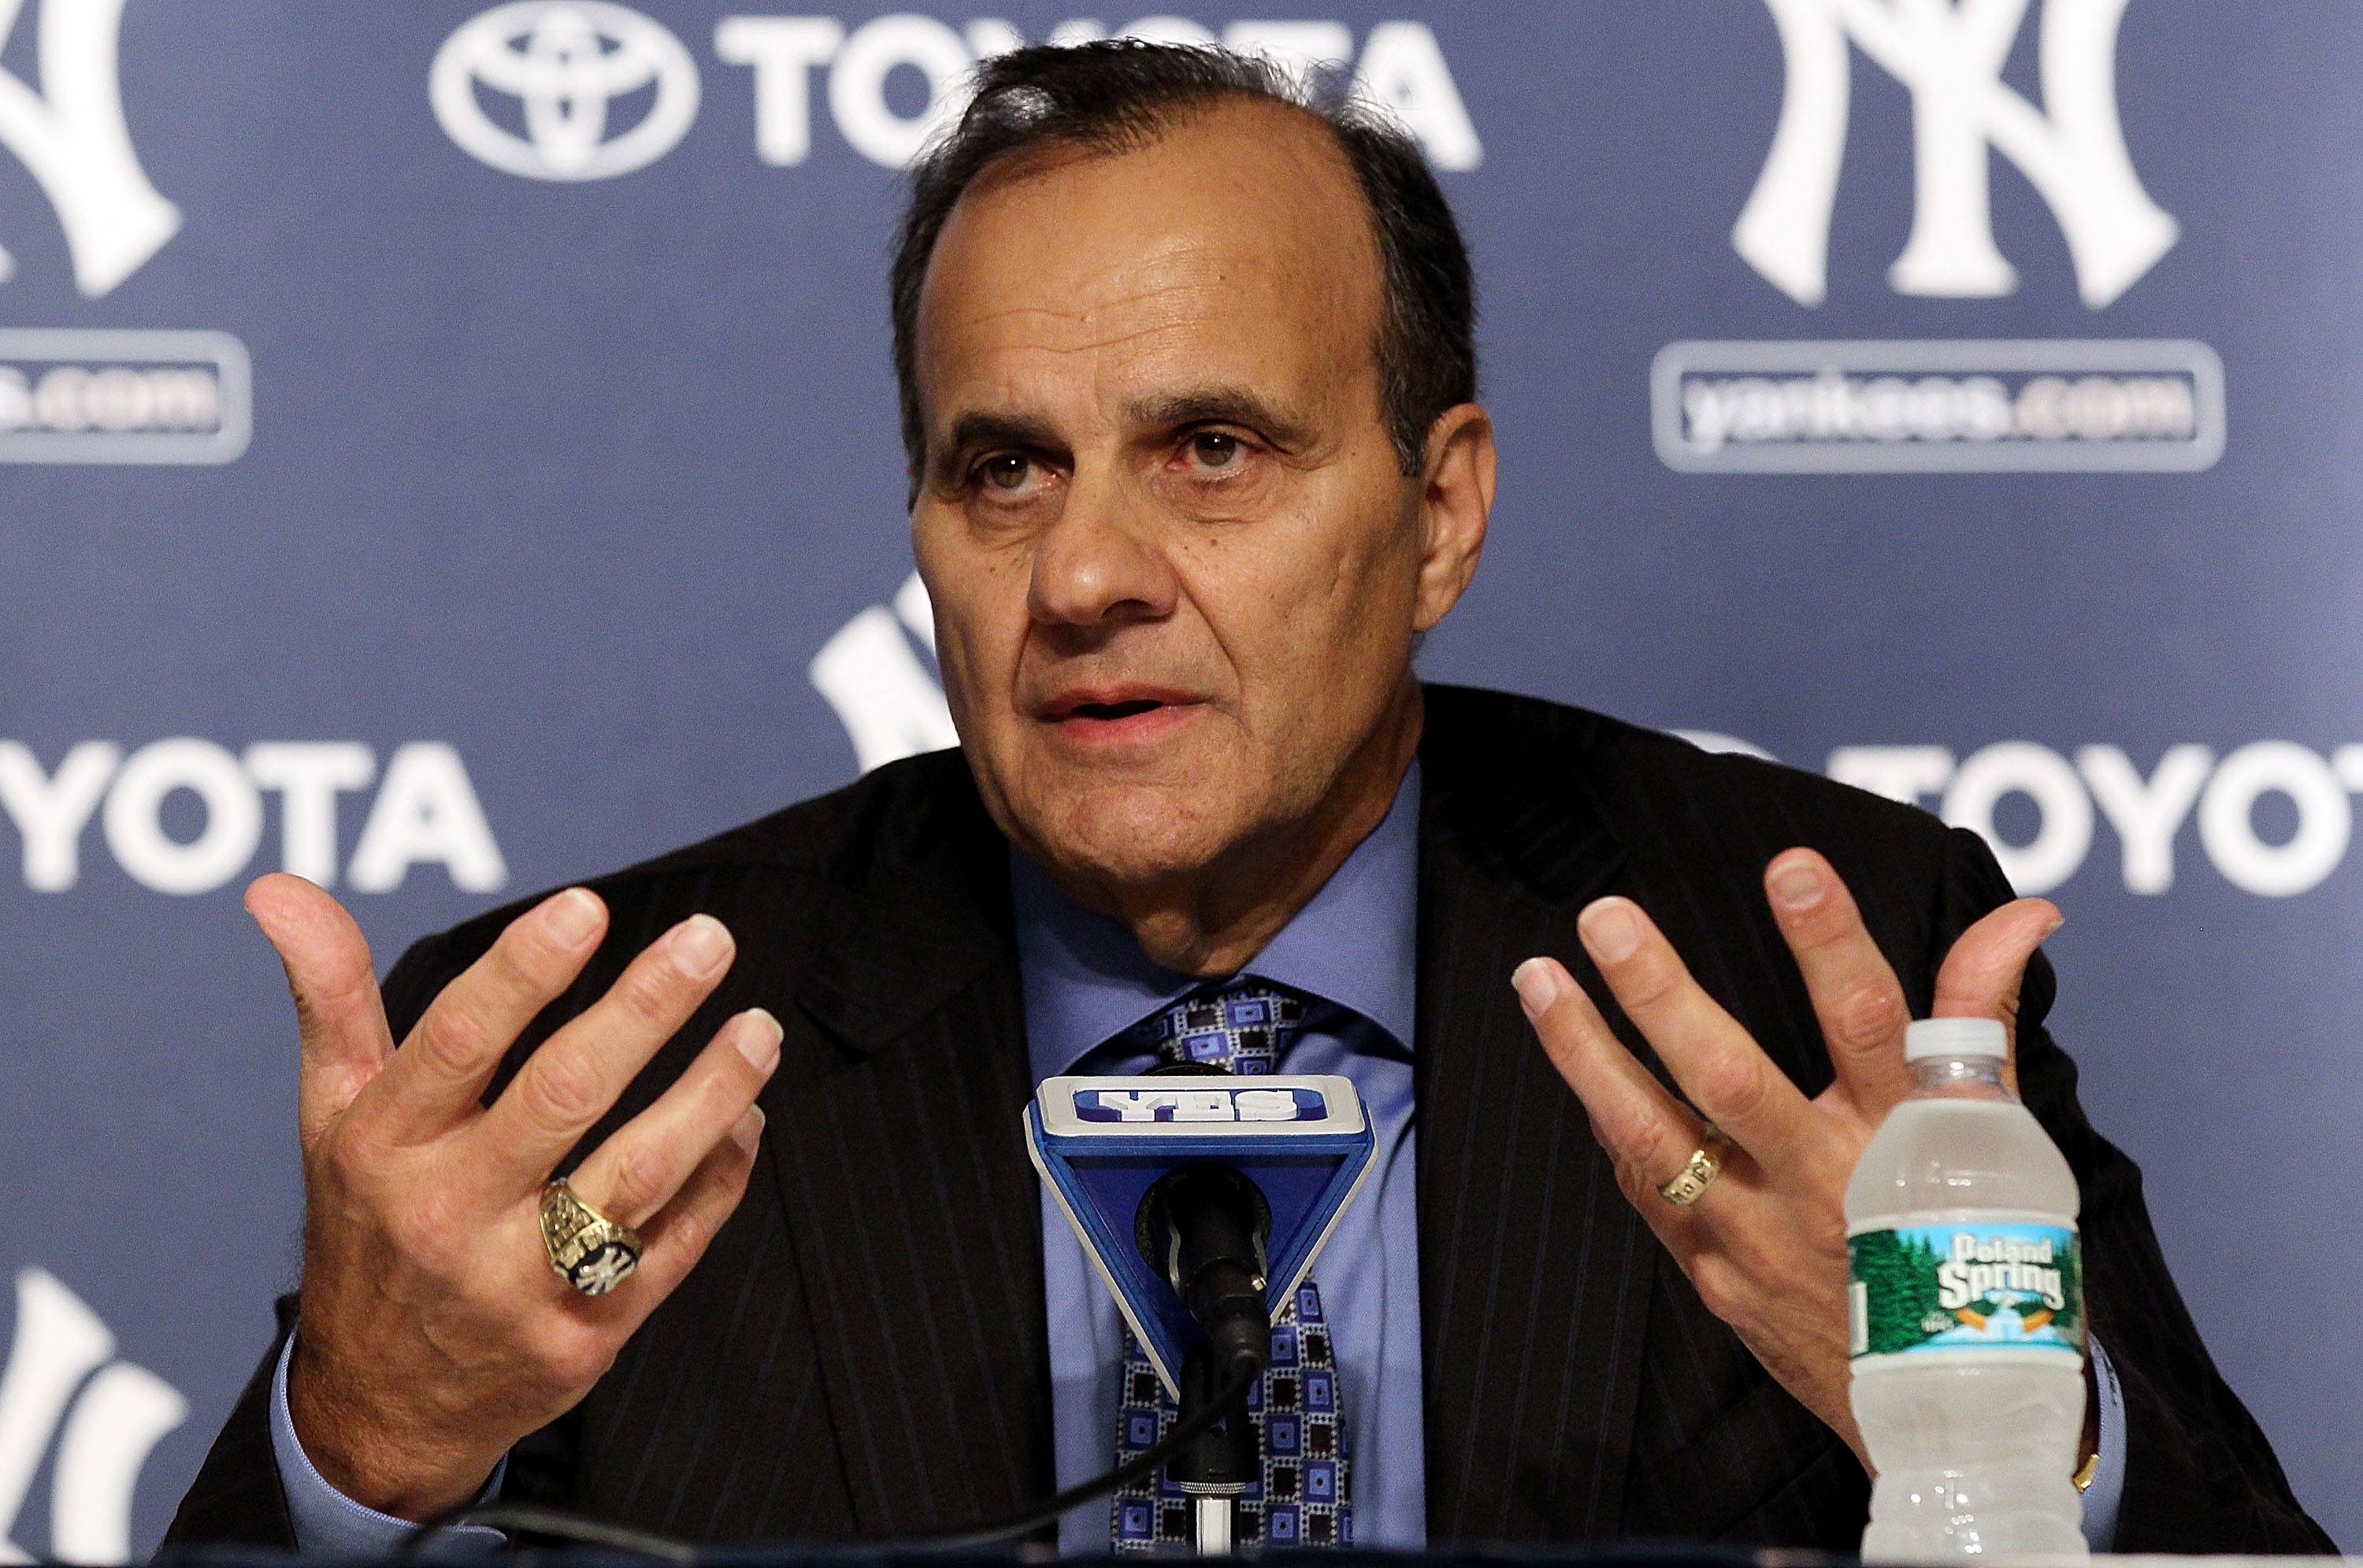 NEW YORK - SEPTEMBER 20:  Former New York Yankees manager Joe Torre speaks to the media prior to the game against the Tampa Bay Rays on September 20, 2010 at Yankee Stadium in the Bronx borough of New York City.  (Photo by Jim McIsaac/Getty Images)